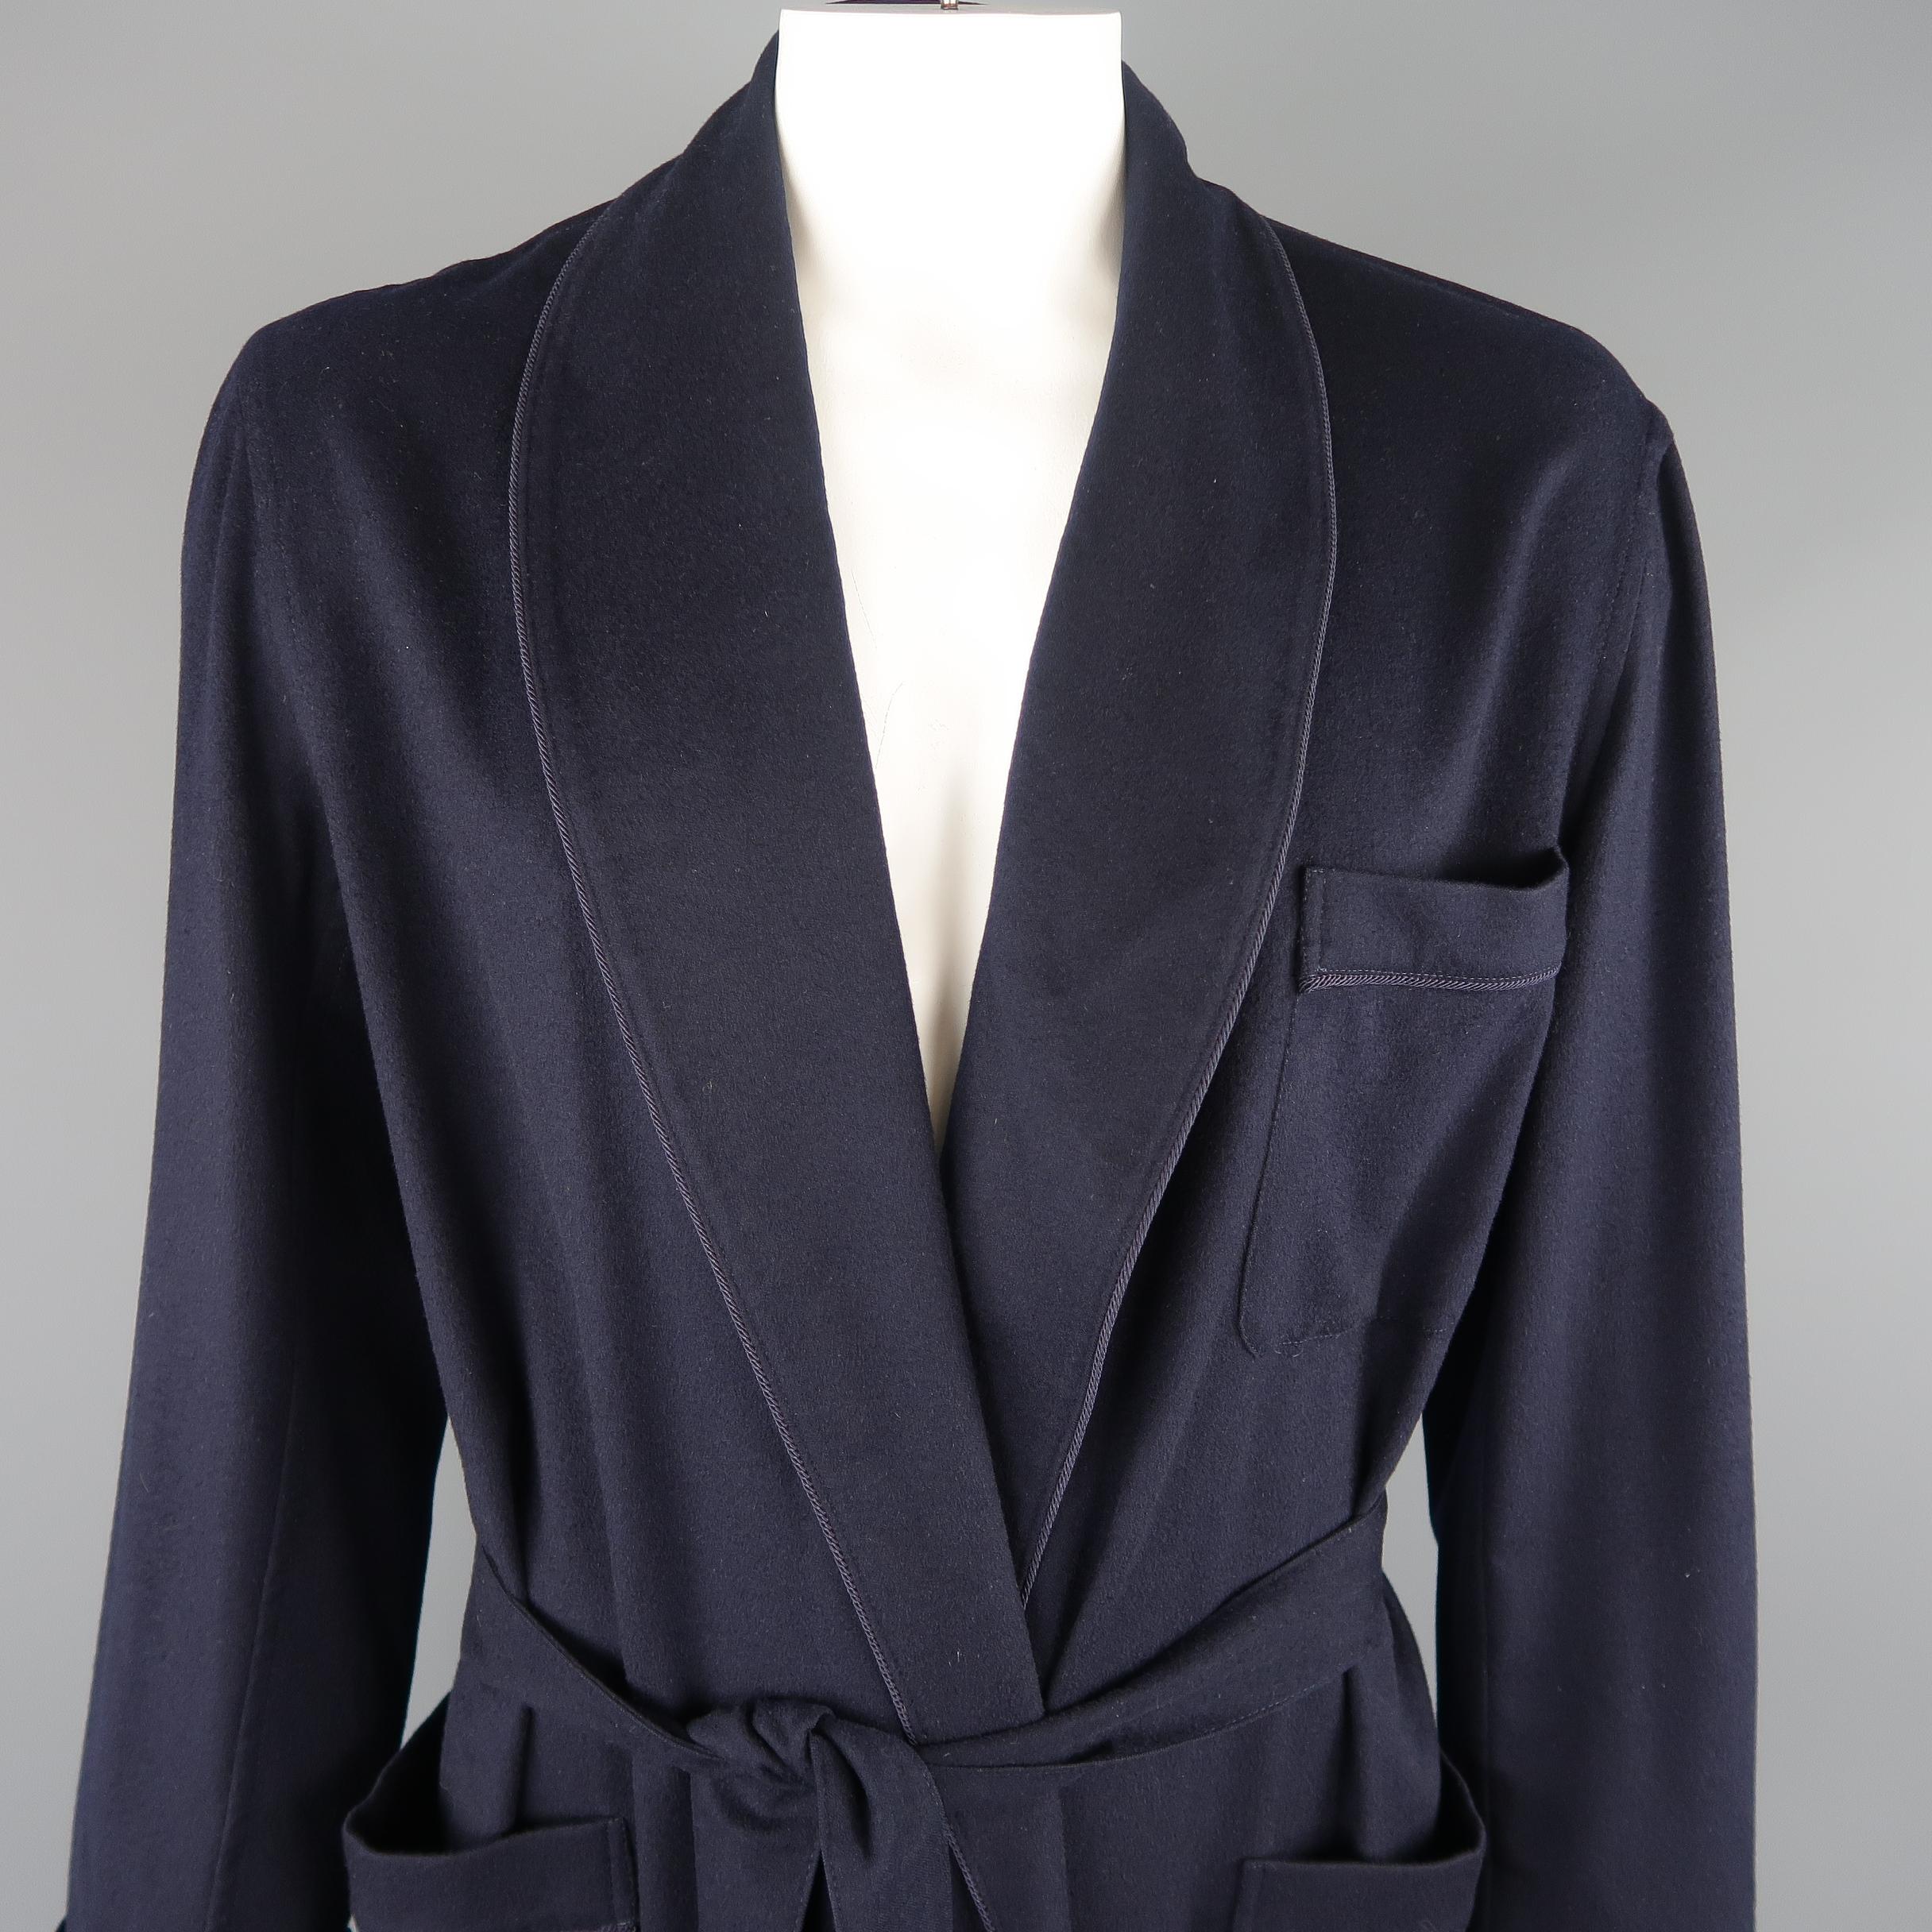 Loro Piana robe comes in navy blue cashmere felt with a shawl collar, belted waist, patch pockets, and rope piping. Made in Italy.
 
Excellent Pre-Owned Condition.
Marked: XL
 
Measurements:
 
Shoulder: 21 in.
Chest: 50 in.
Sleeve: 26 in.
Length: 50